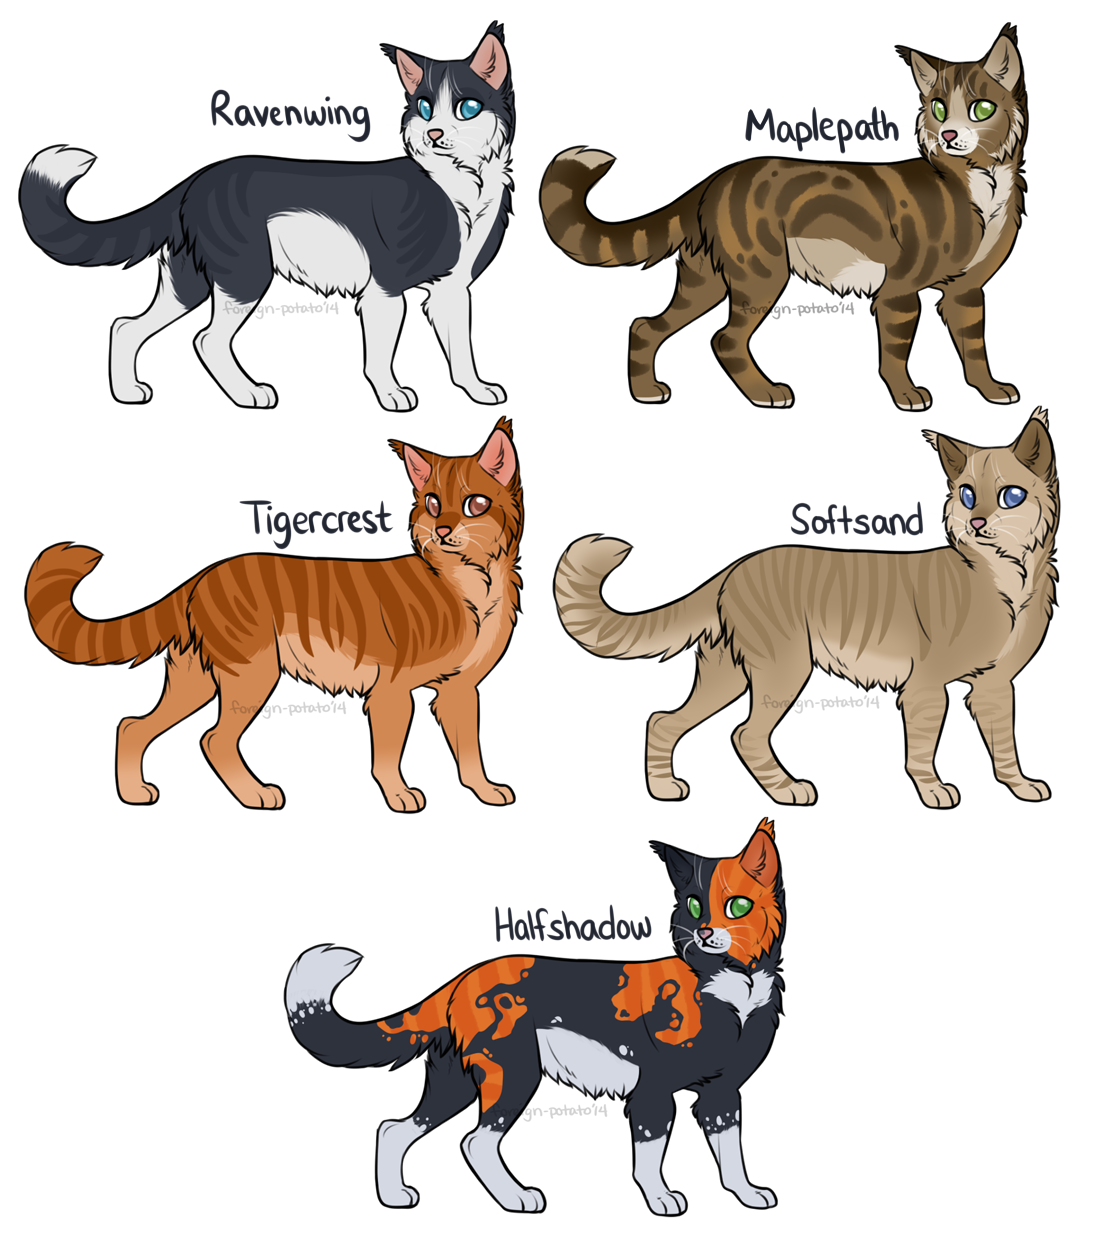 Kittens favourites by Akeela-Quill on DeviantArt